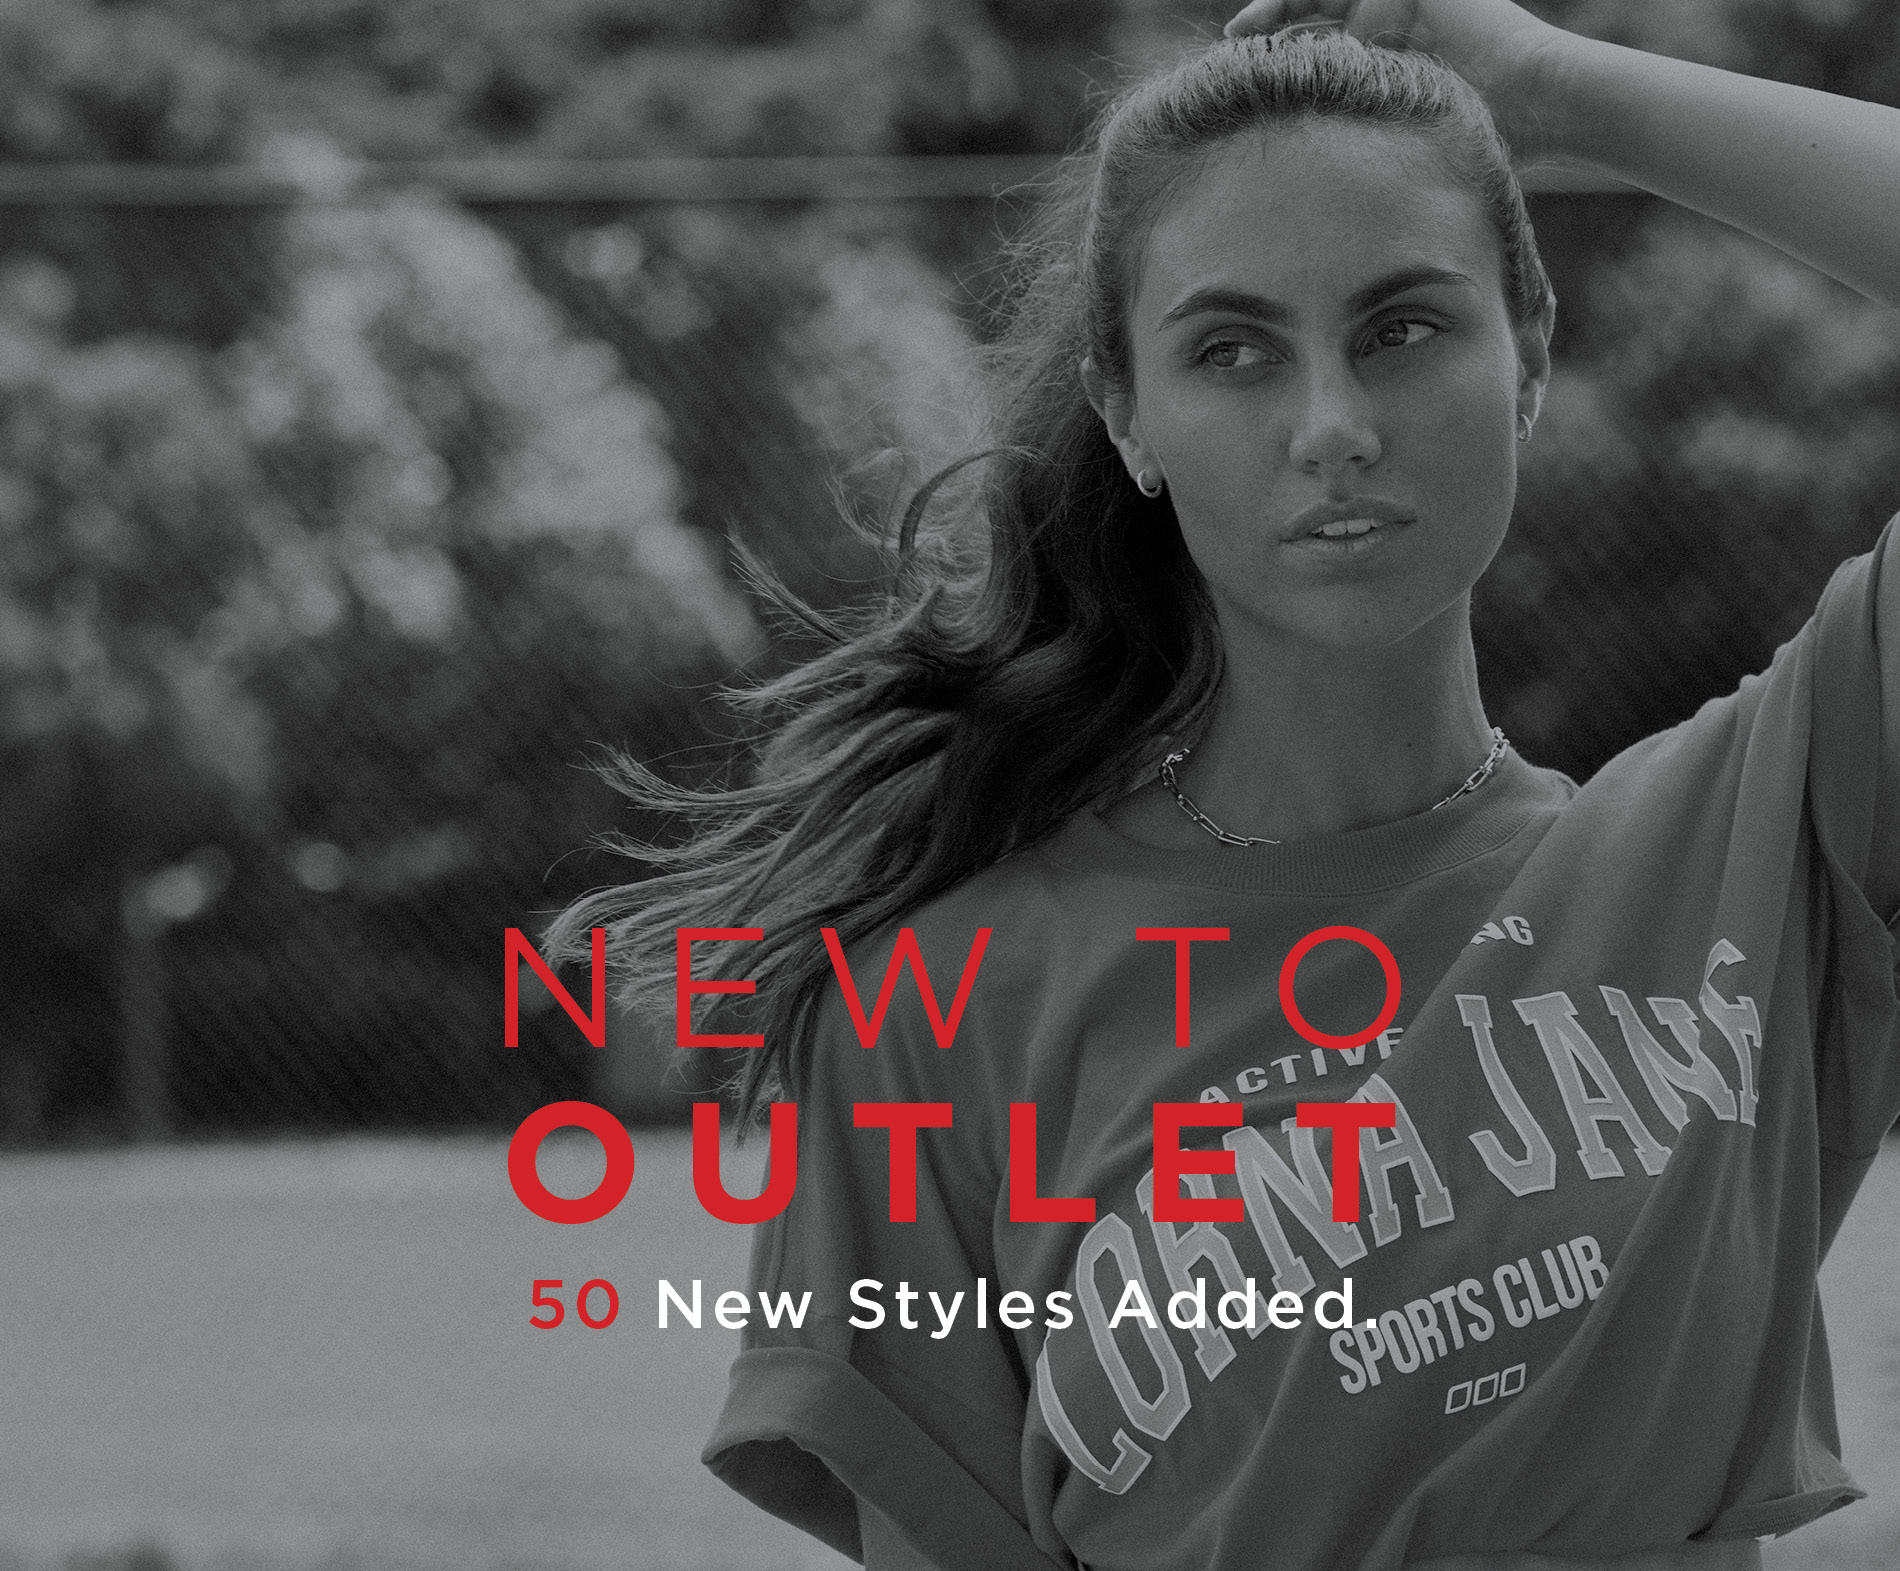 Shop New to Outlet